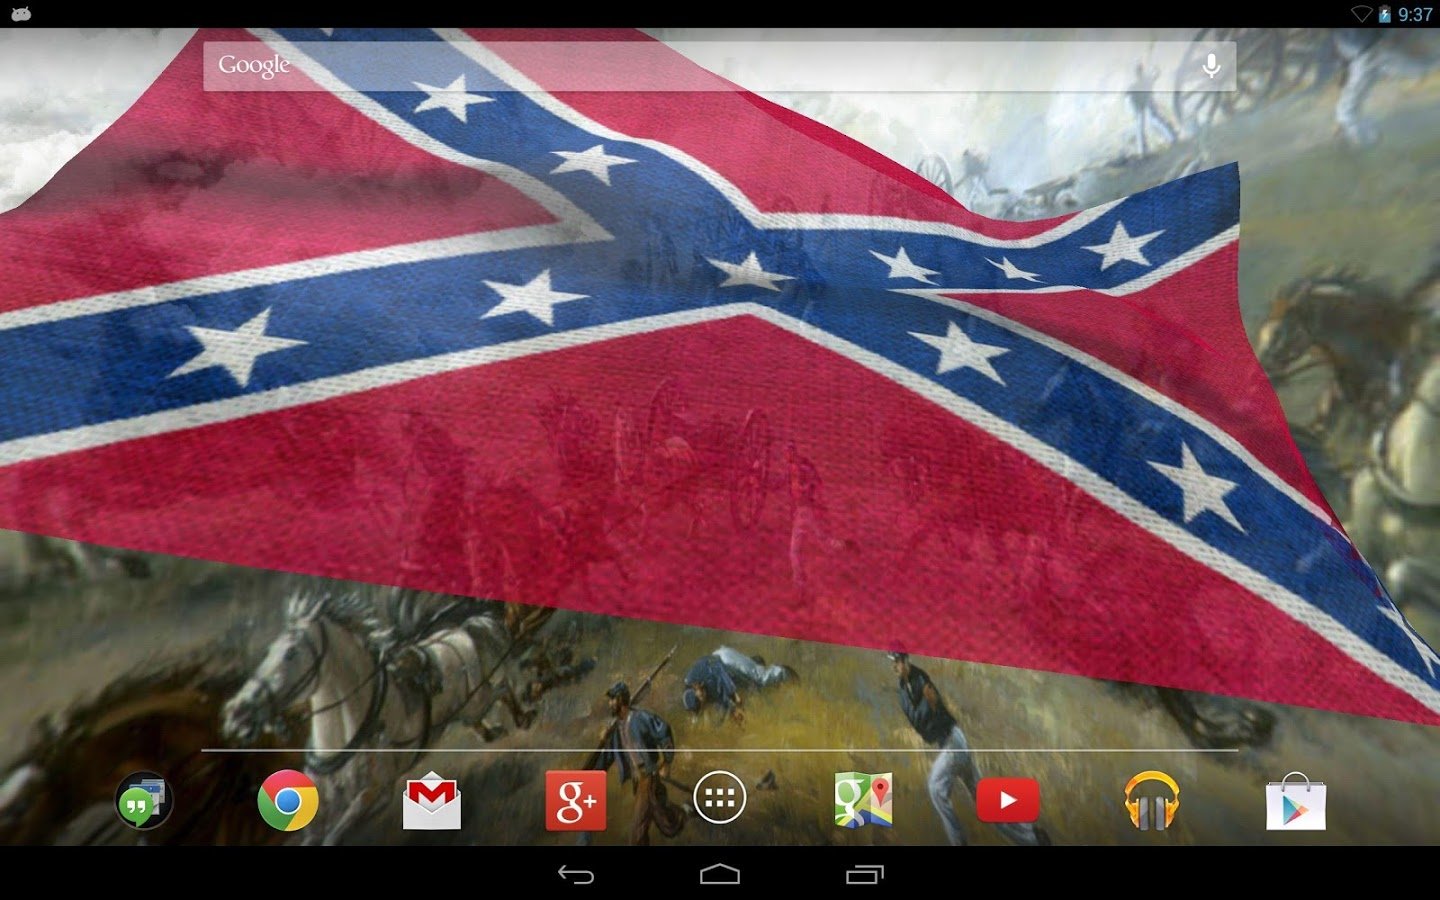 Rebel Flag Live Wallpaper Free   Android Apps on Google Play